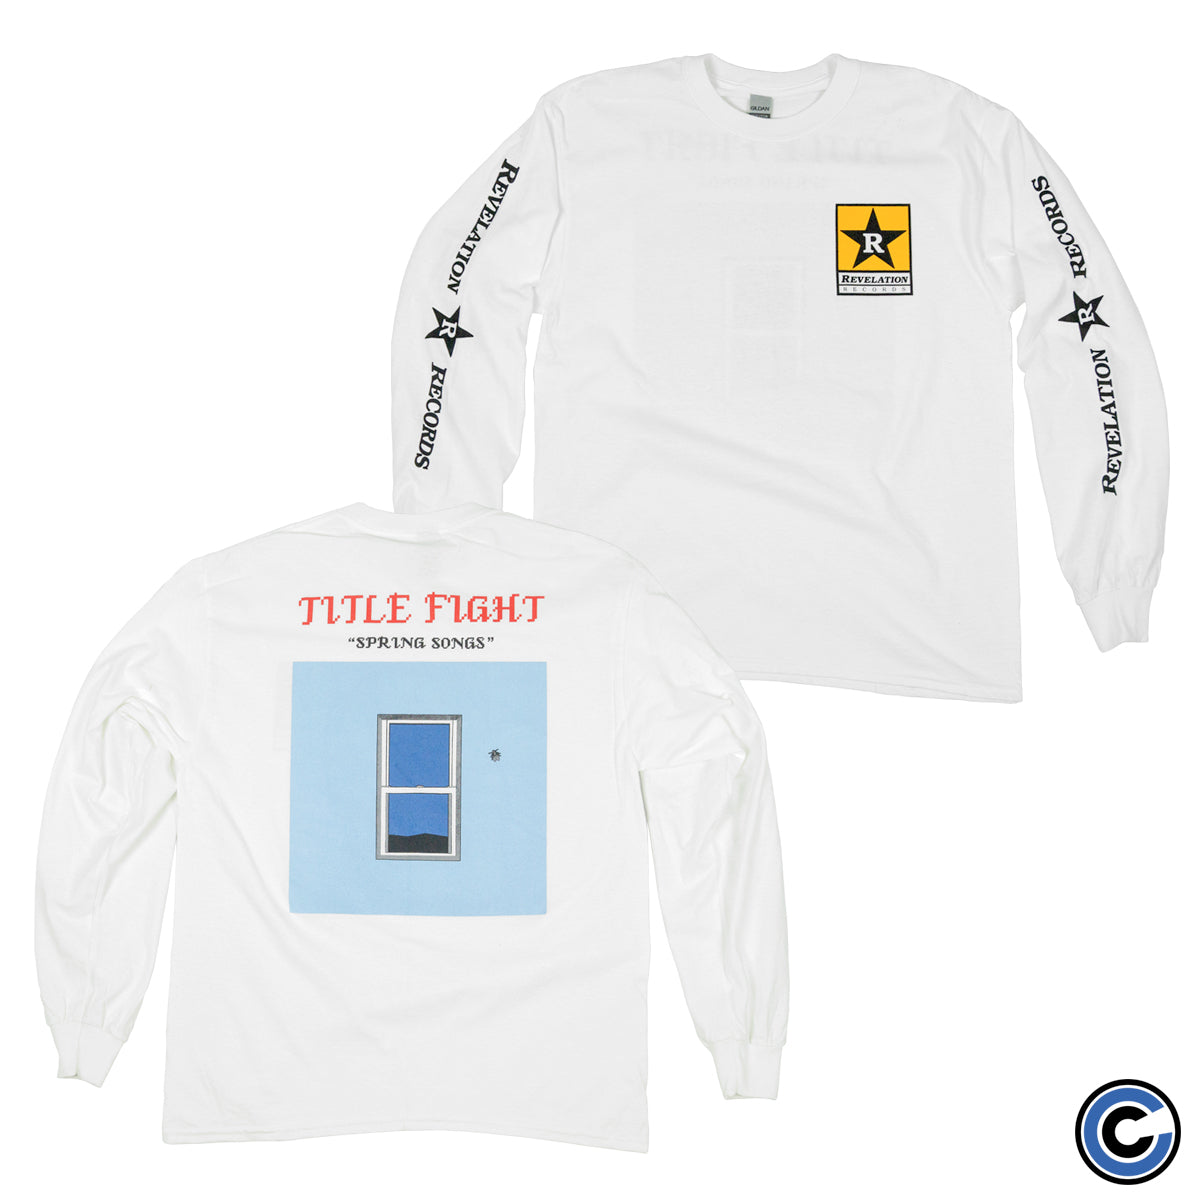 Title Fight "Spring Songs" Long Sleeve